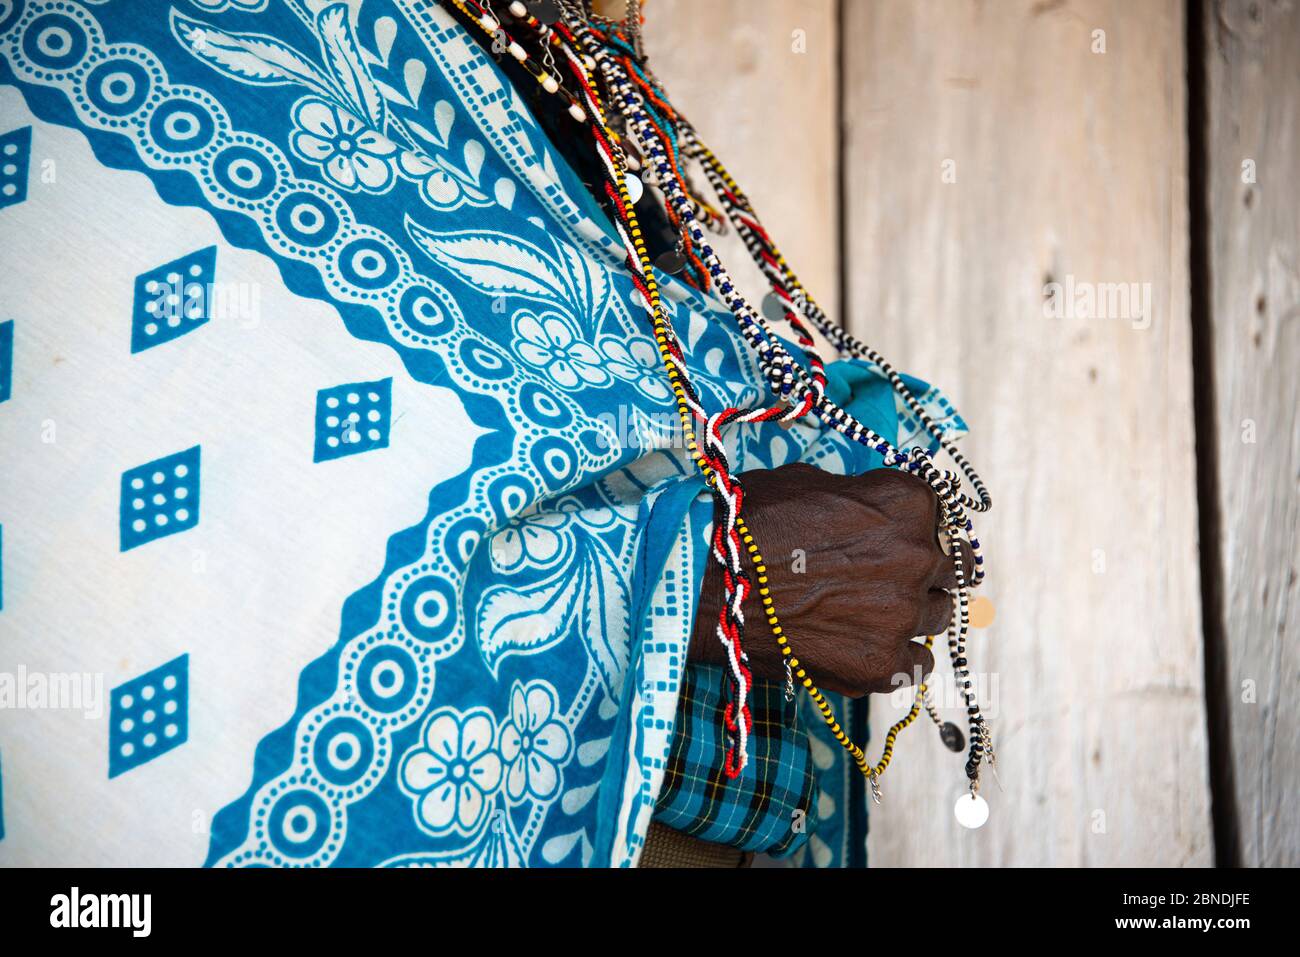 Maasai woman's hands in traditional clothing Stock Photo